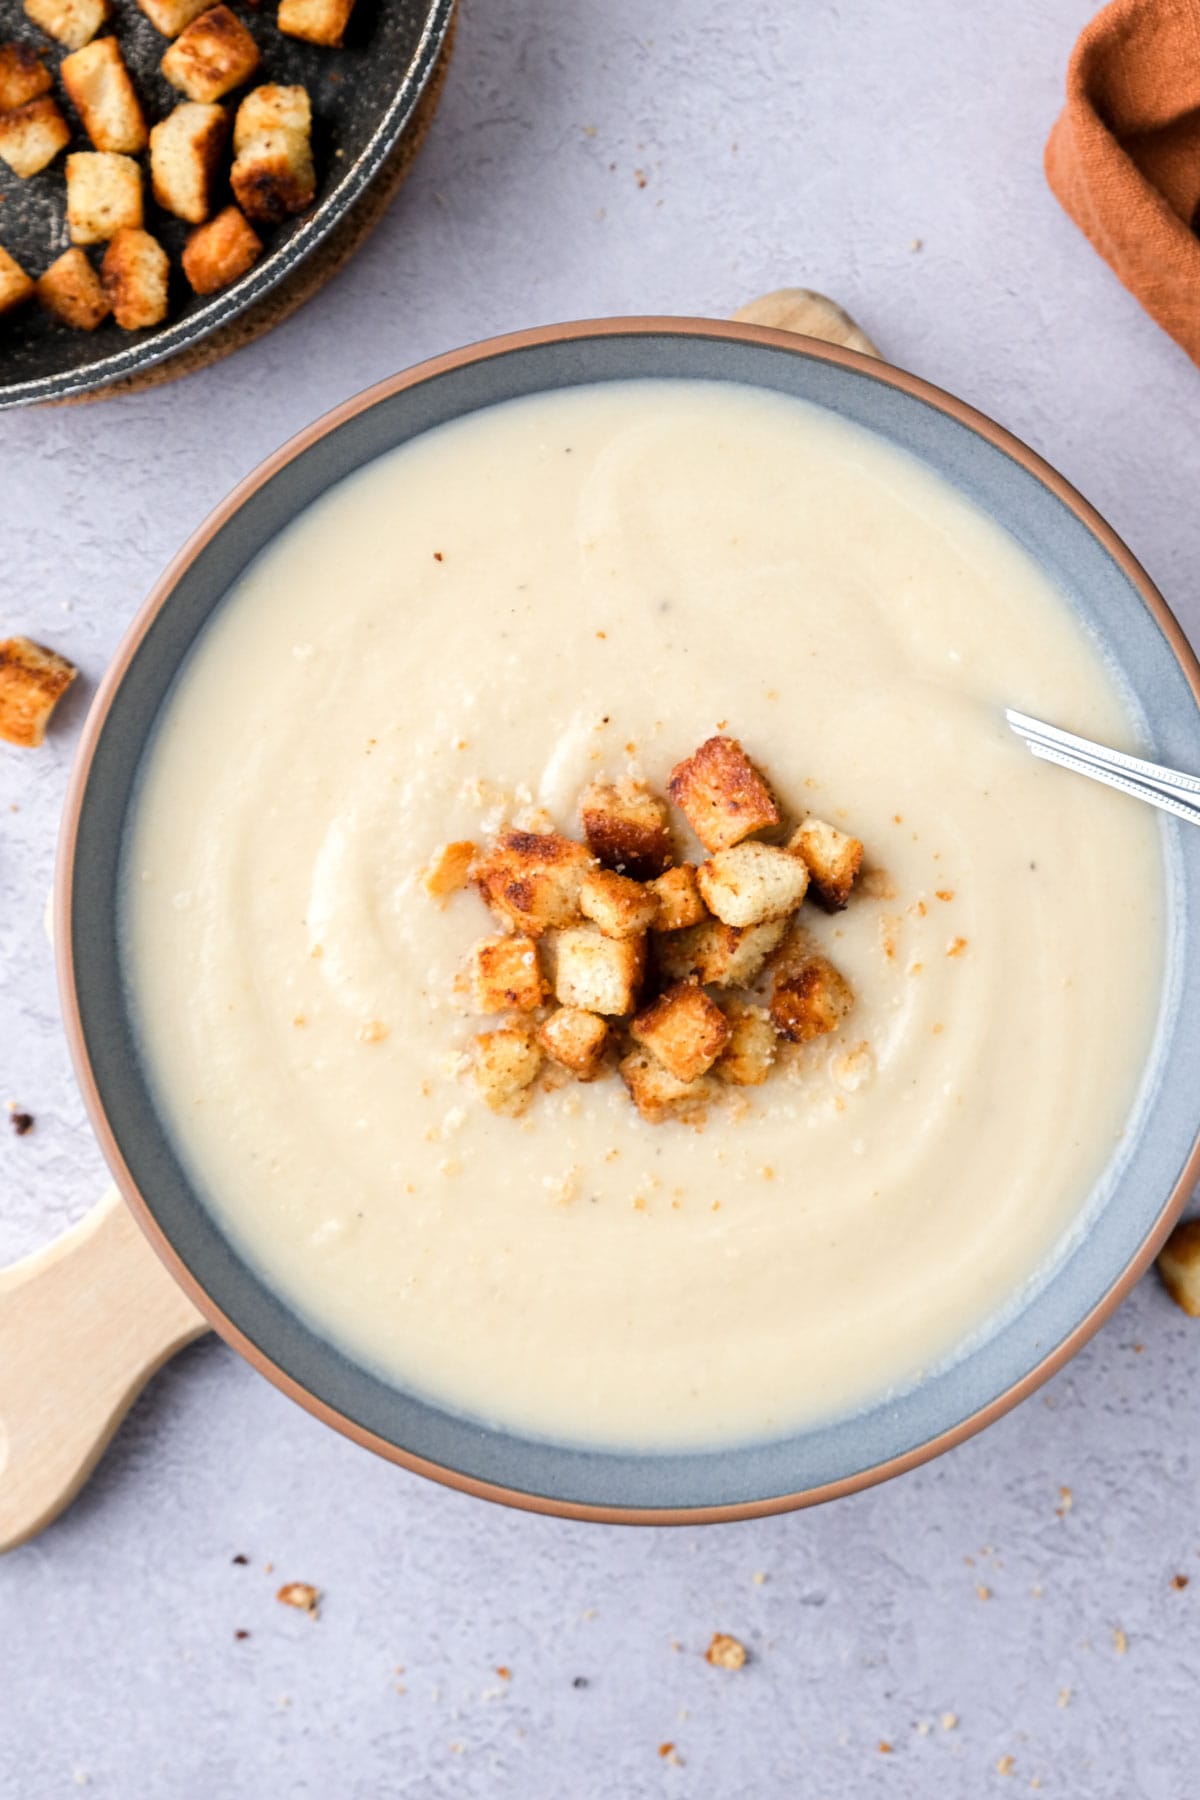 celeriac soup seen form top down in blue bowl with silver spoon and croutons on top.